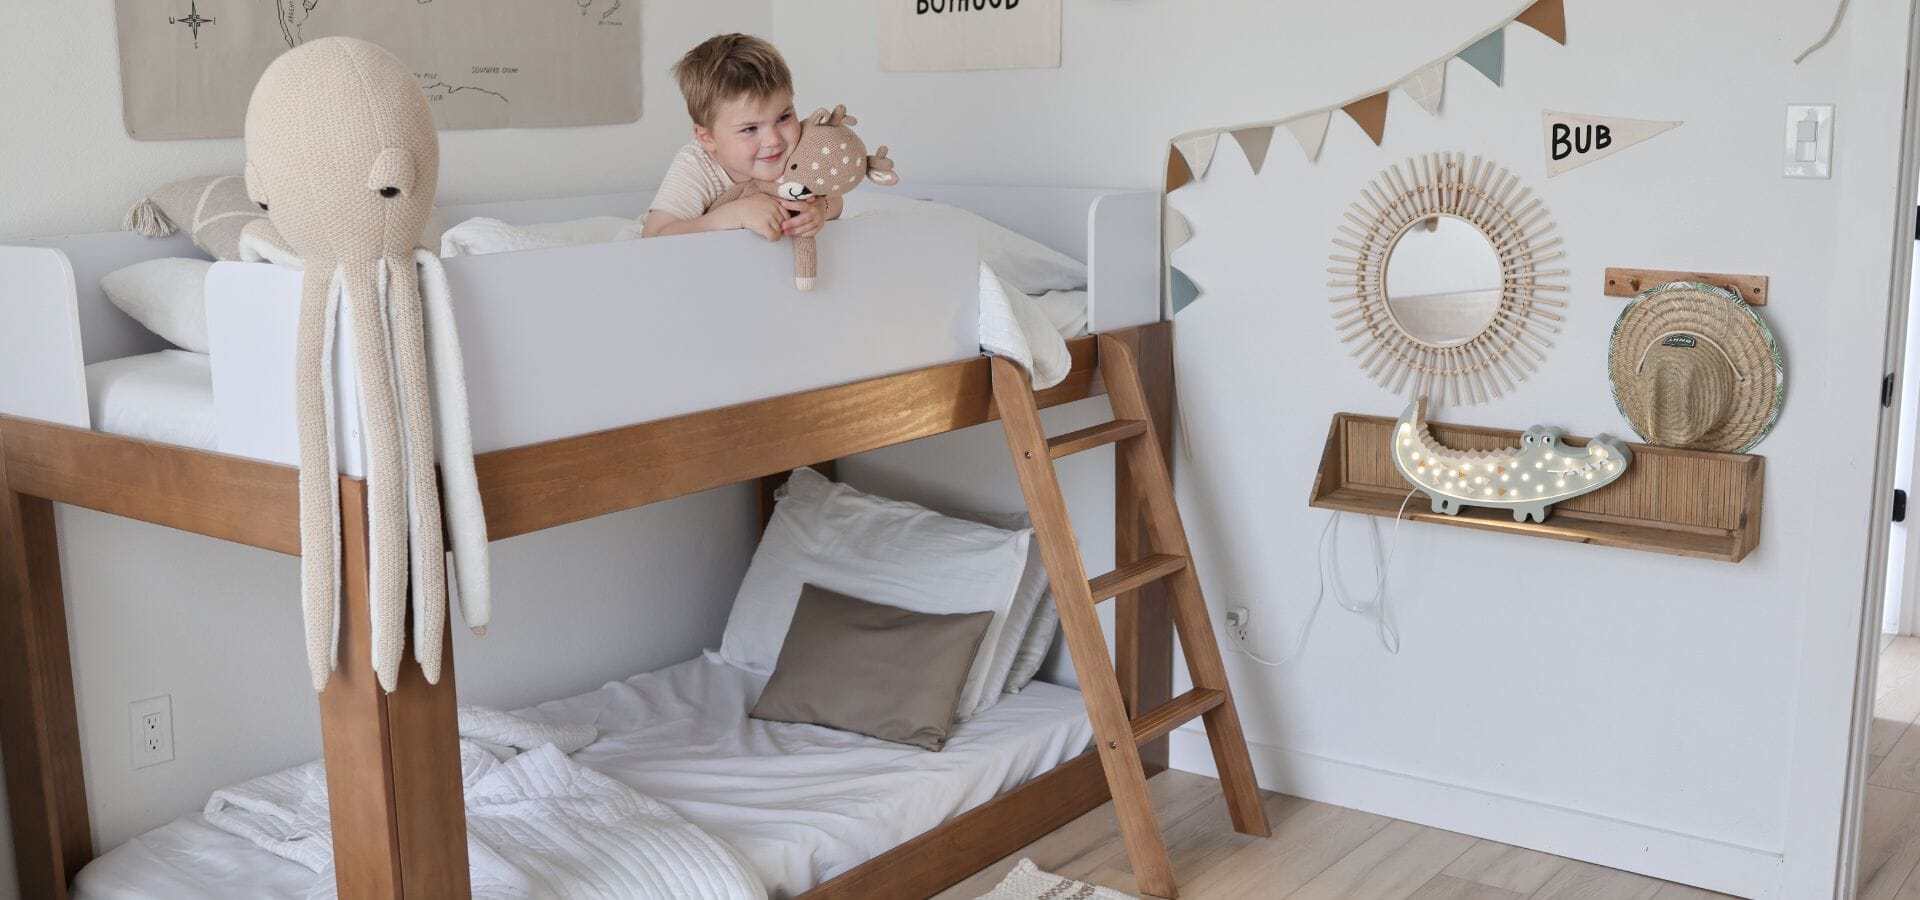 mid century modern low bunk bed in pecan and white